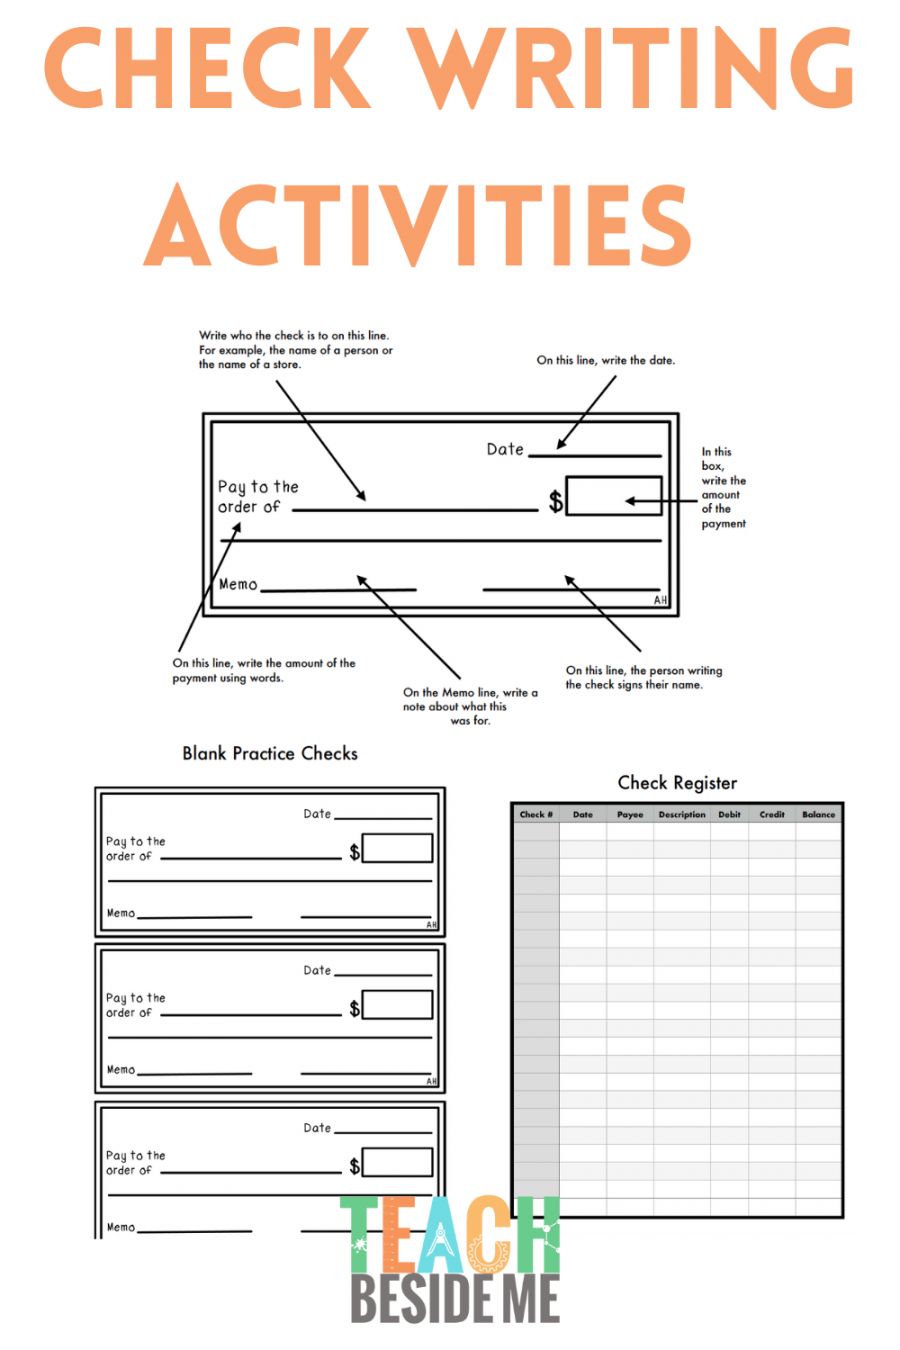 Writing a Check Worksheet for Kids - Teach Beside Me